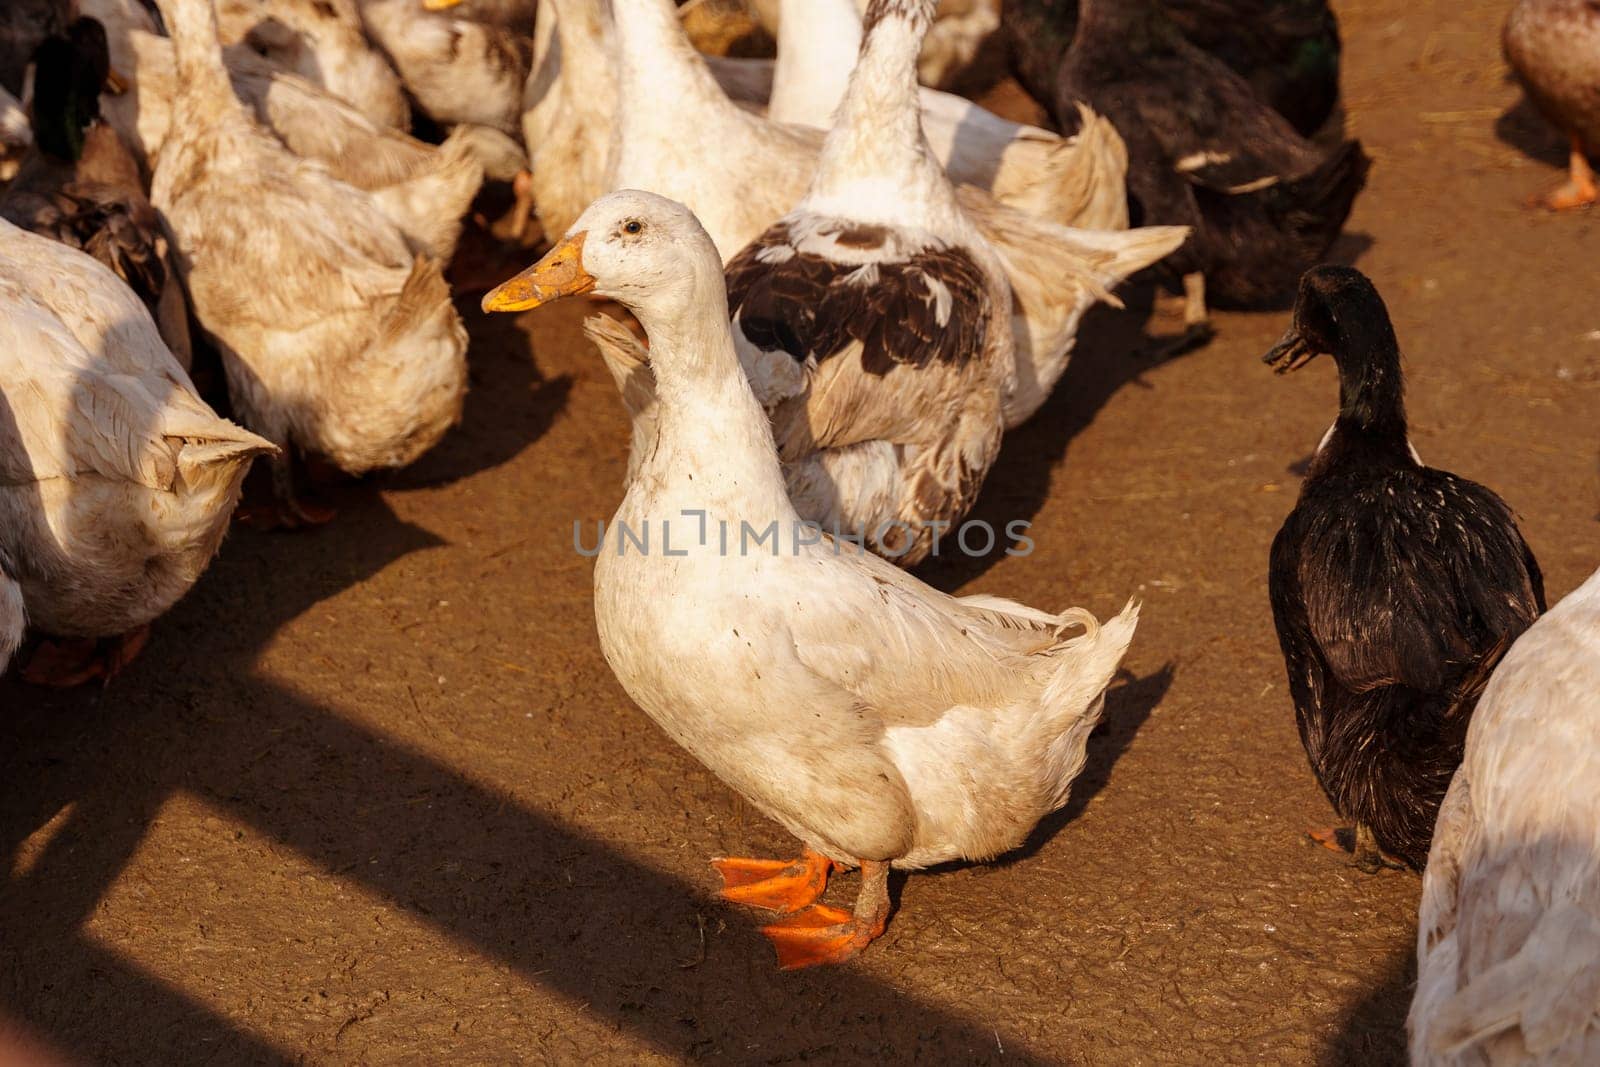 Ducks are standing on farm, their feathers blending with the earth as they explore the ground with their beaks.